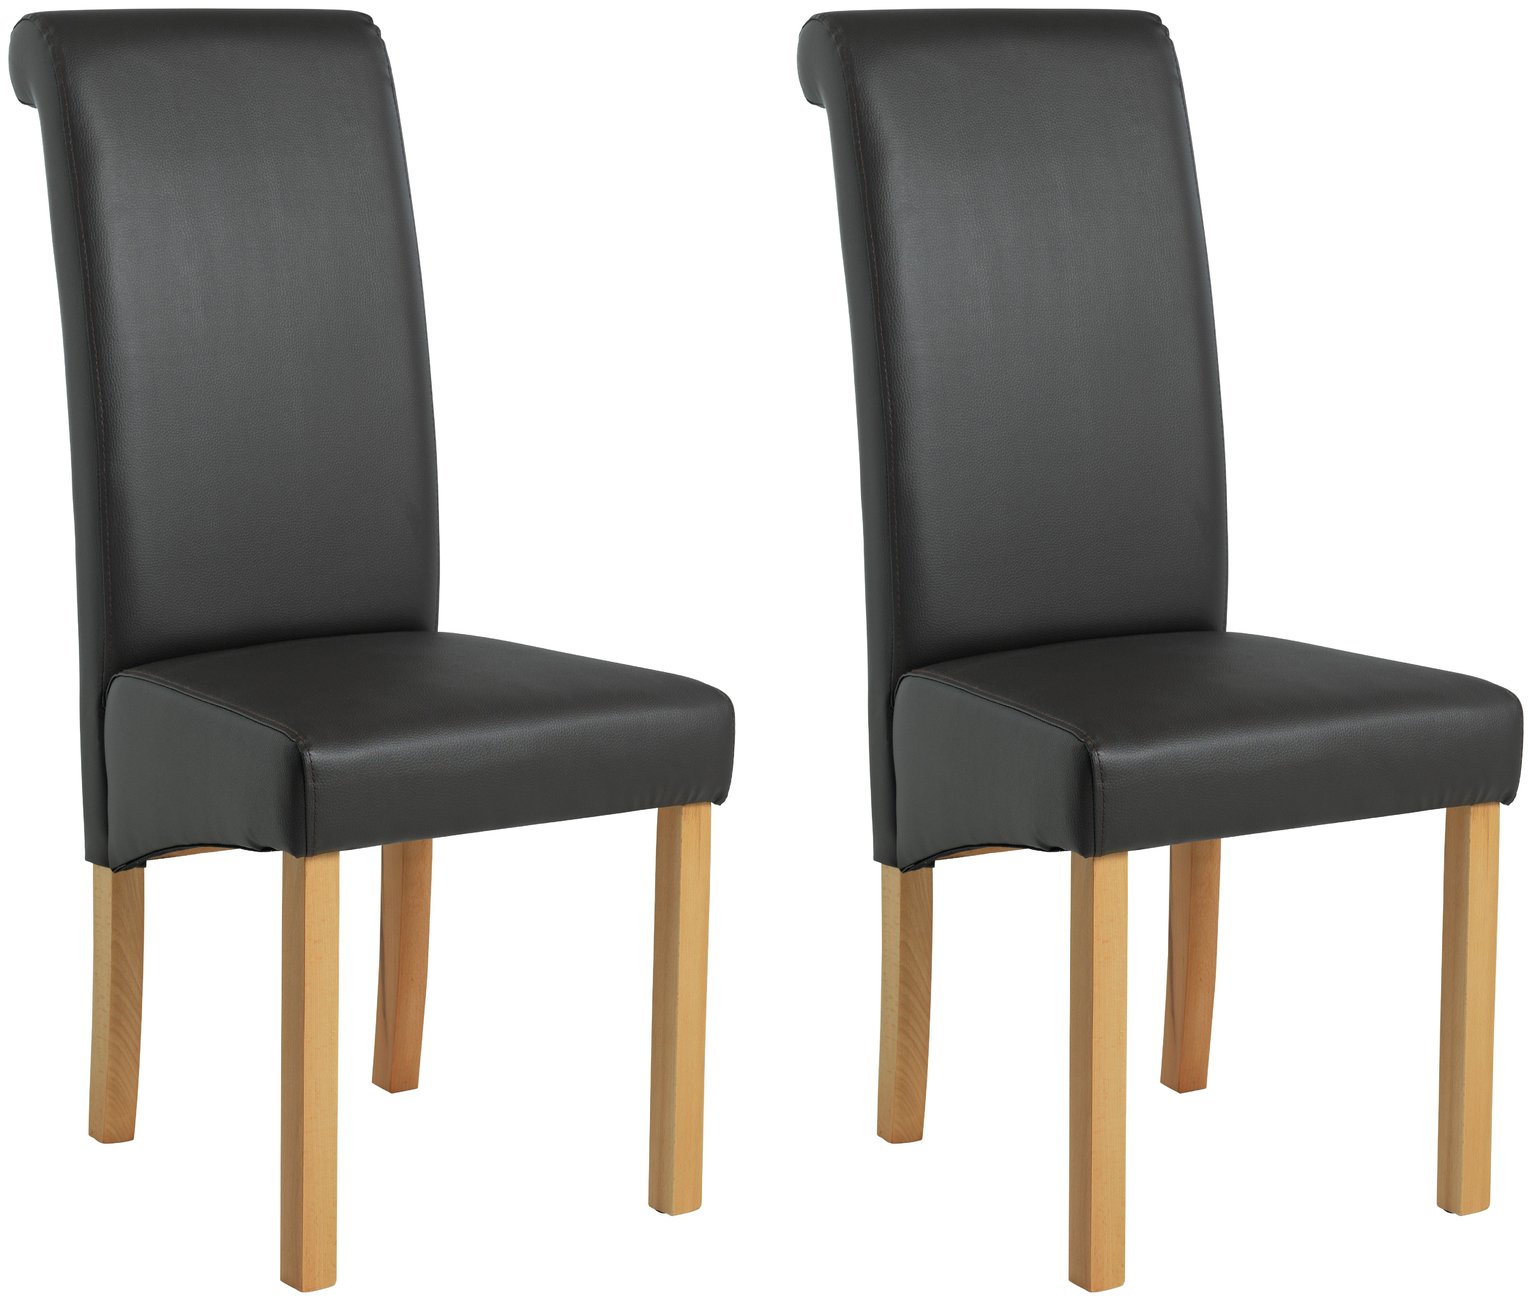 Argos Home 2 Leather Effect Scrollback Chairs - Chocolate